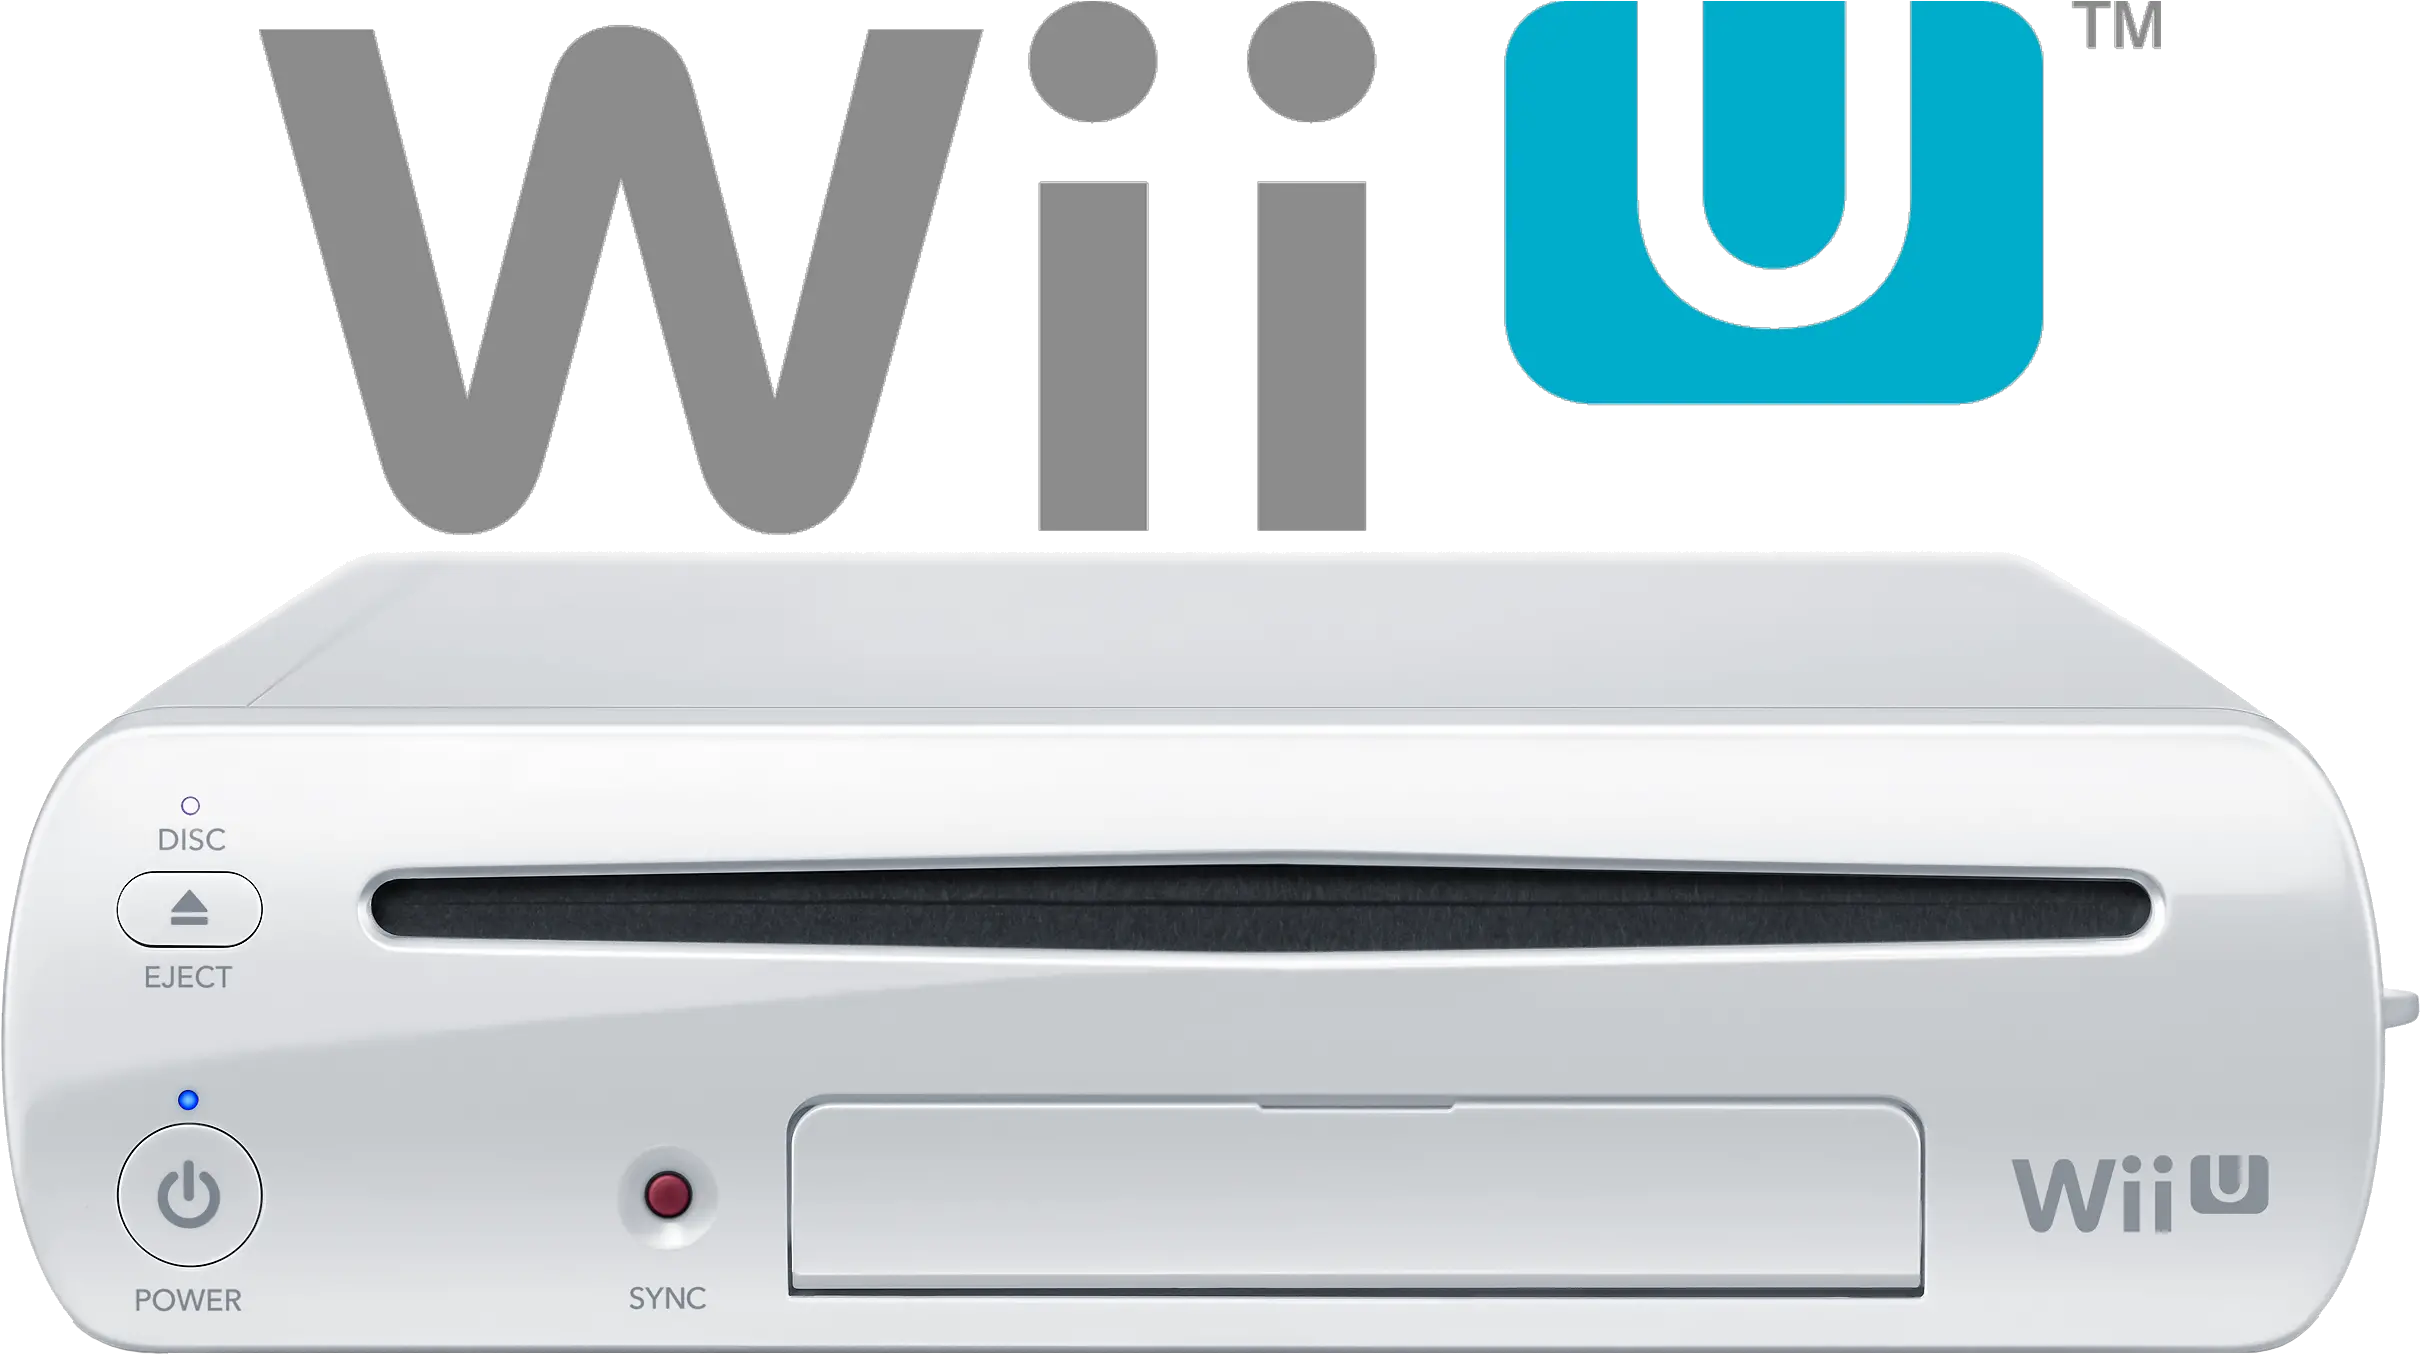 Download Hd Wii U Console Wii U Png Transparent Png Image Portable Wii Png